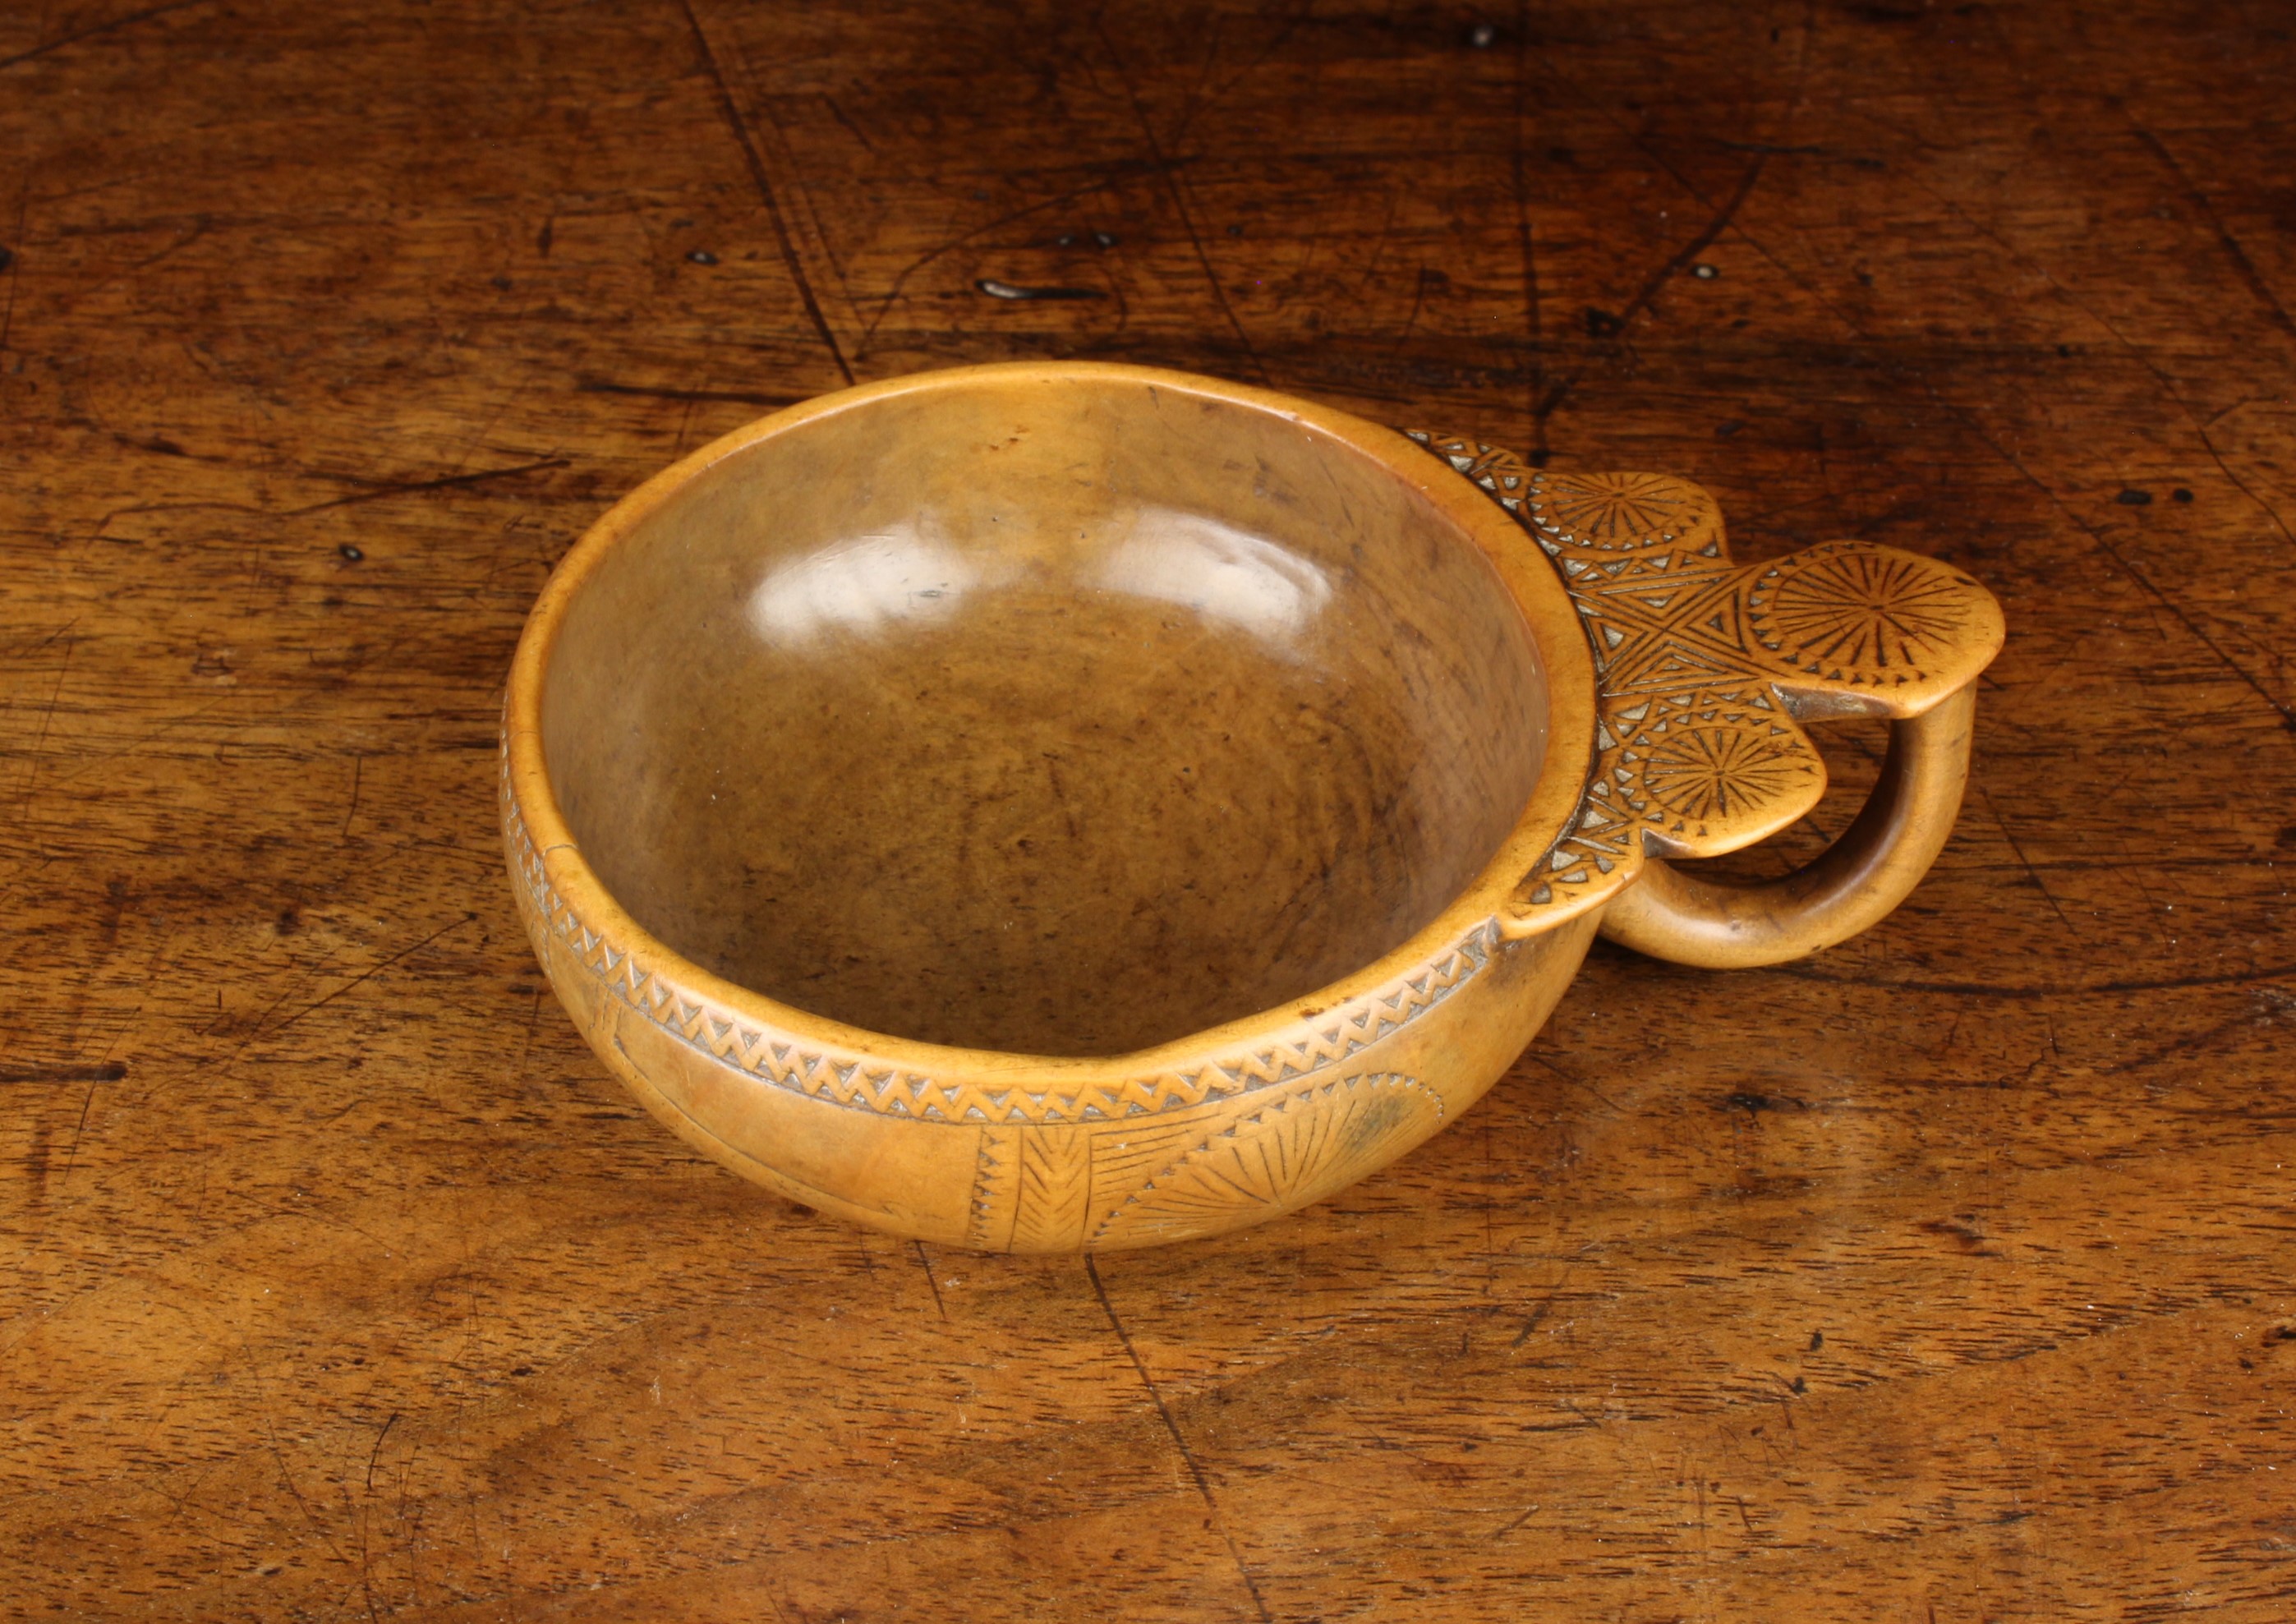 A Fine & Rare 16th/17th Century Boxwood Porringer or Tasting Cup of rich colour and patination. - Image 9 of 10